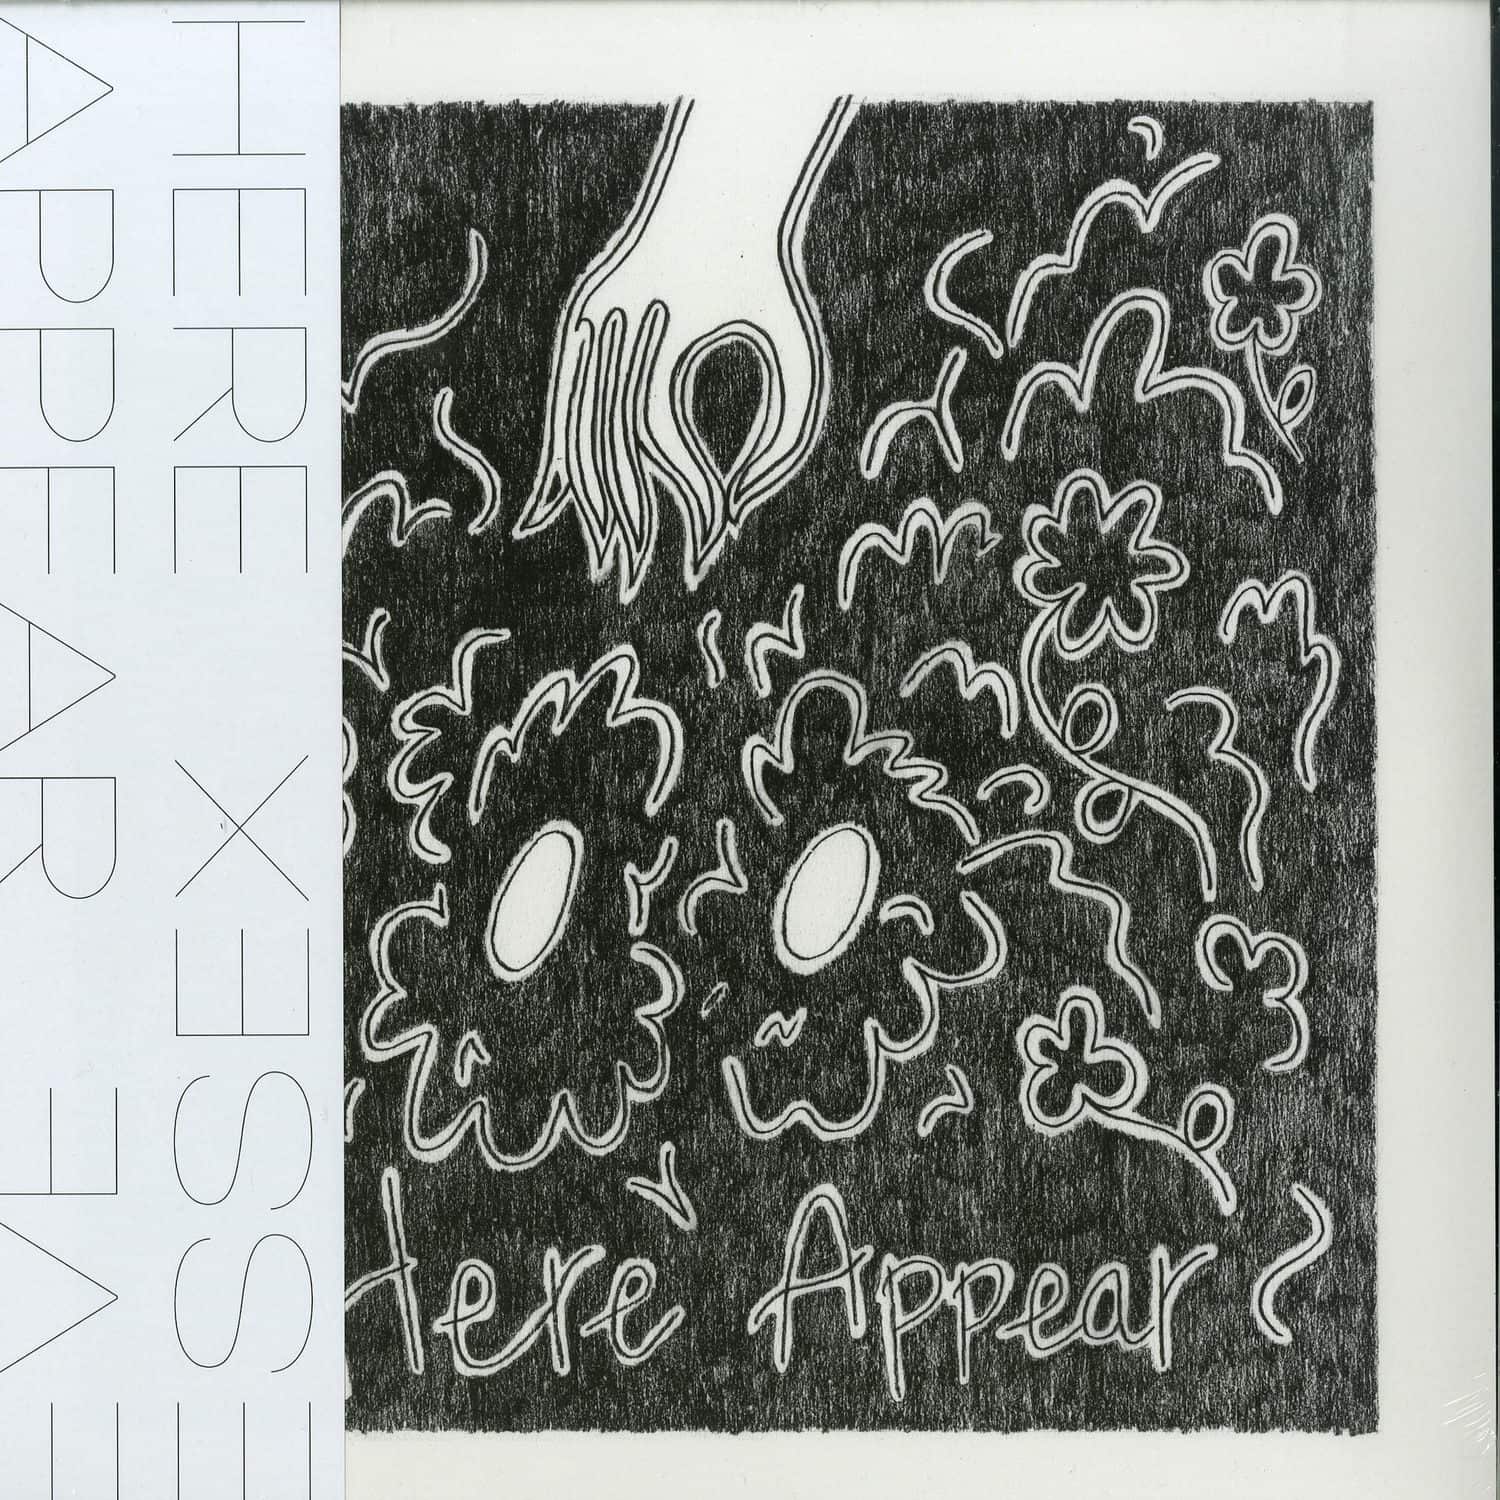 Eve Essex - HERE APPEAR 